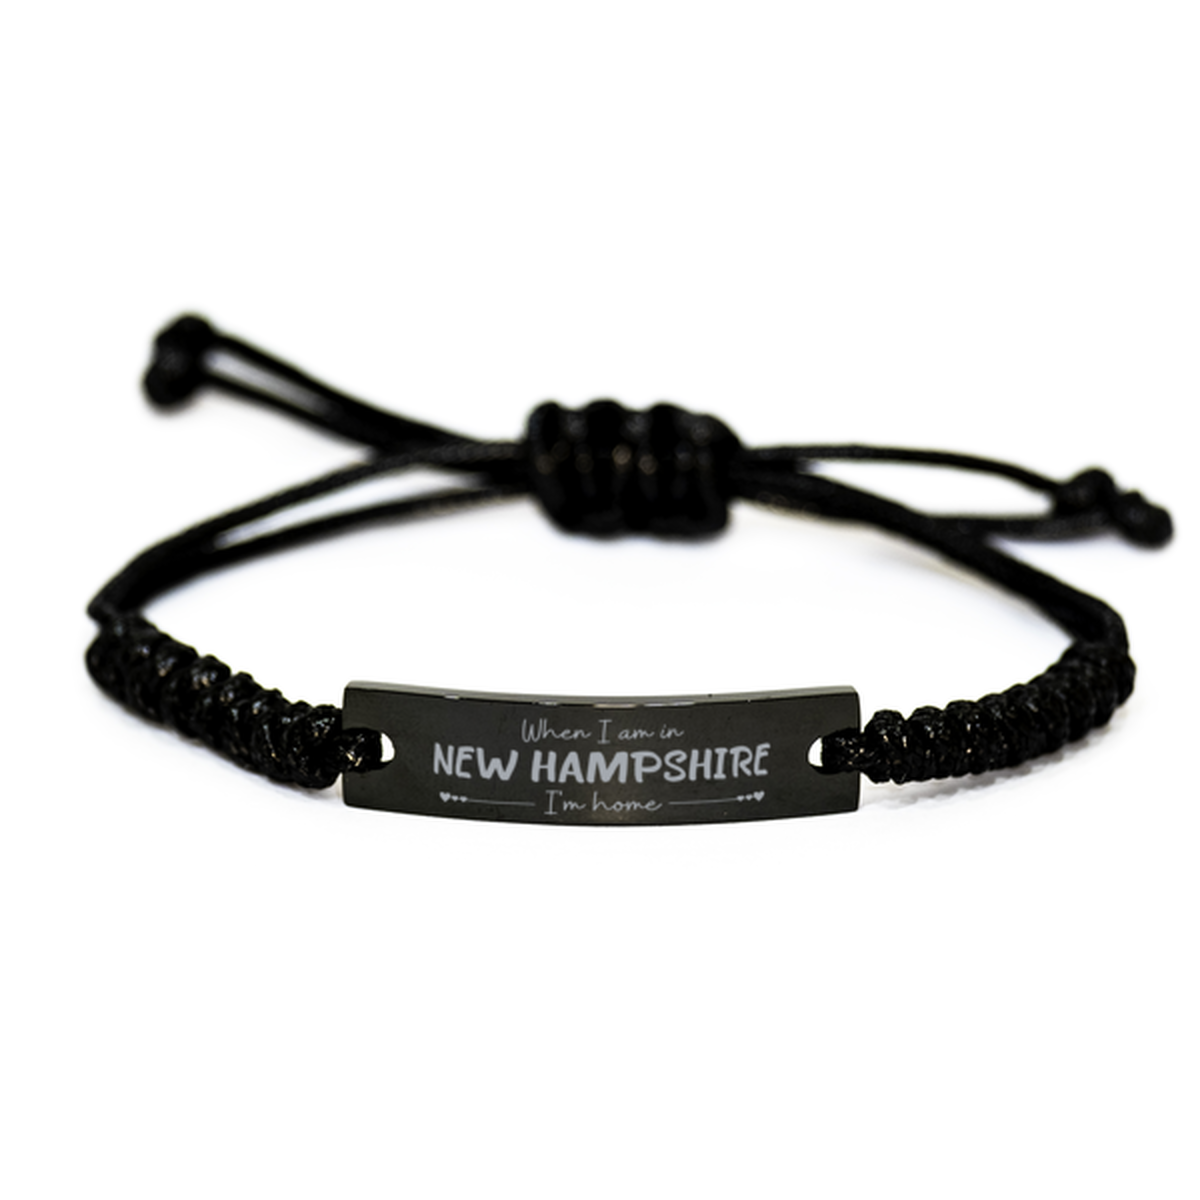 When I am in New Hampshire I'm home Black Rope Bracelet, Cheap Gifts For New Hampshire, State New Hampshire Birthday Gifts for Friends Coworker